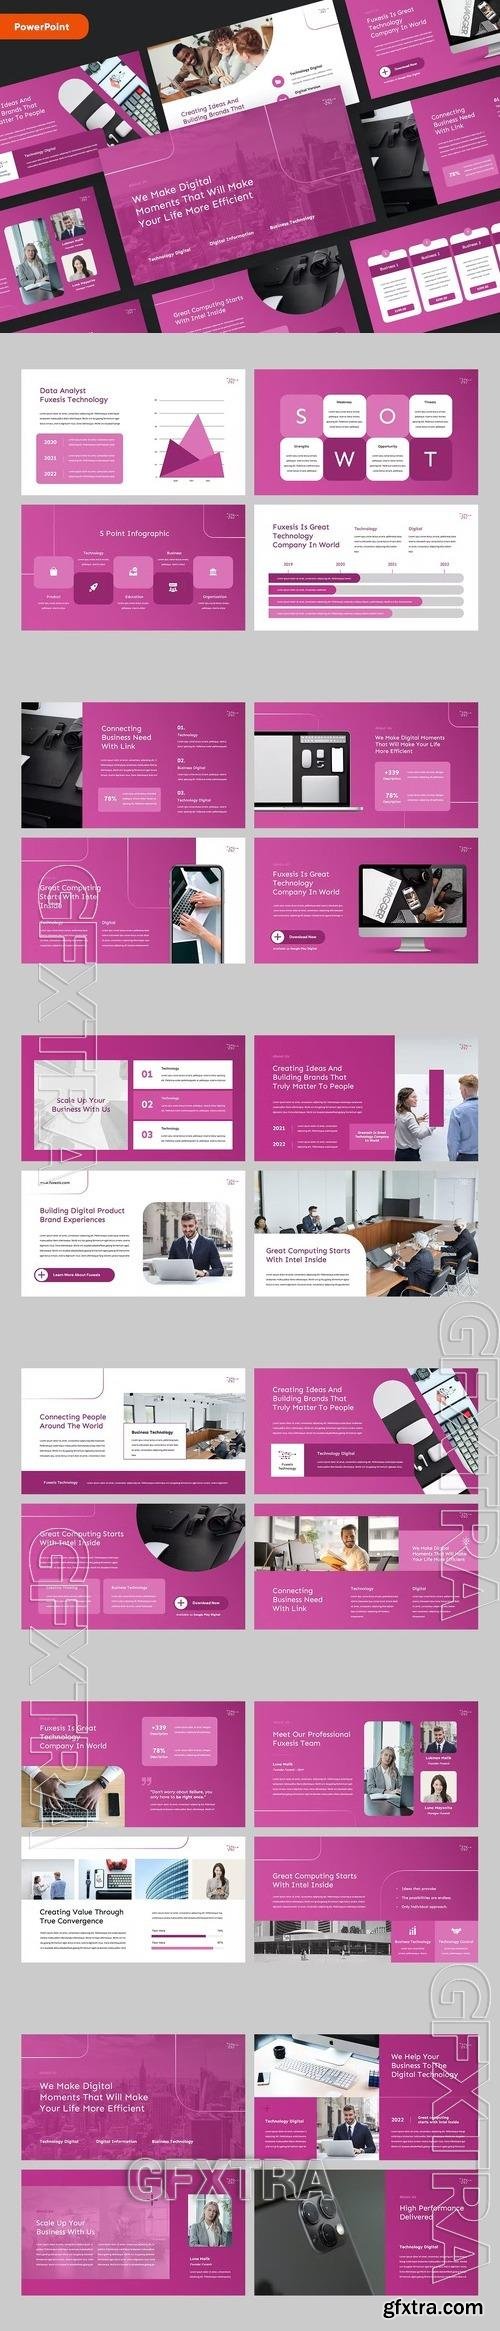 Technology Powerpoint Template WCUYULD